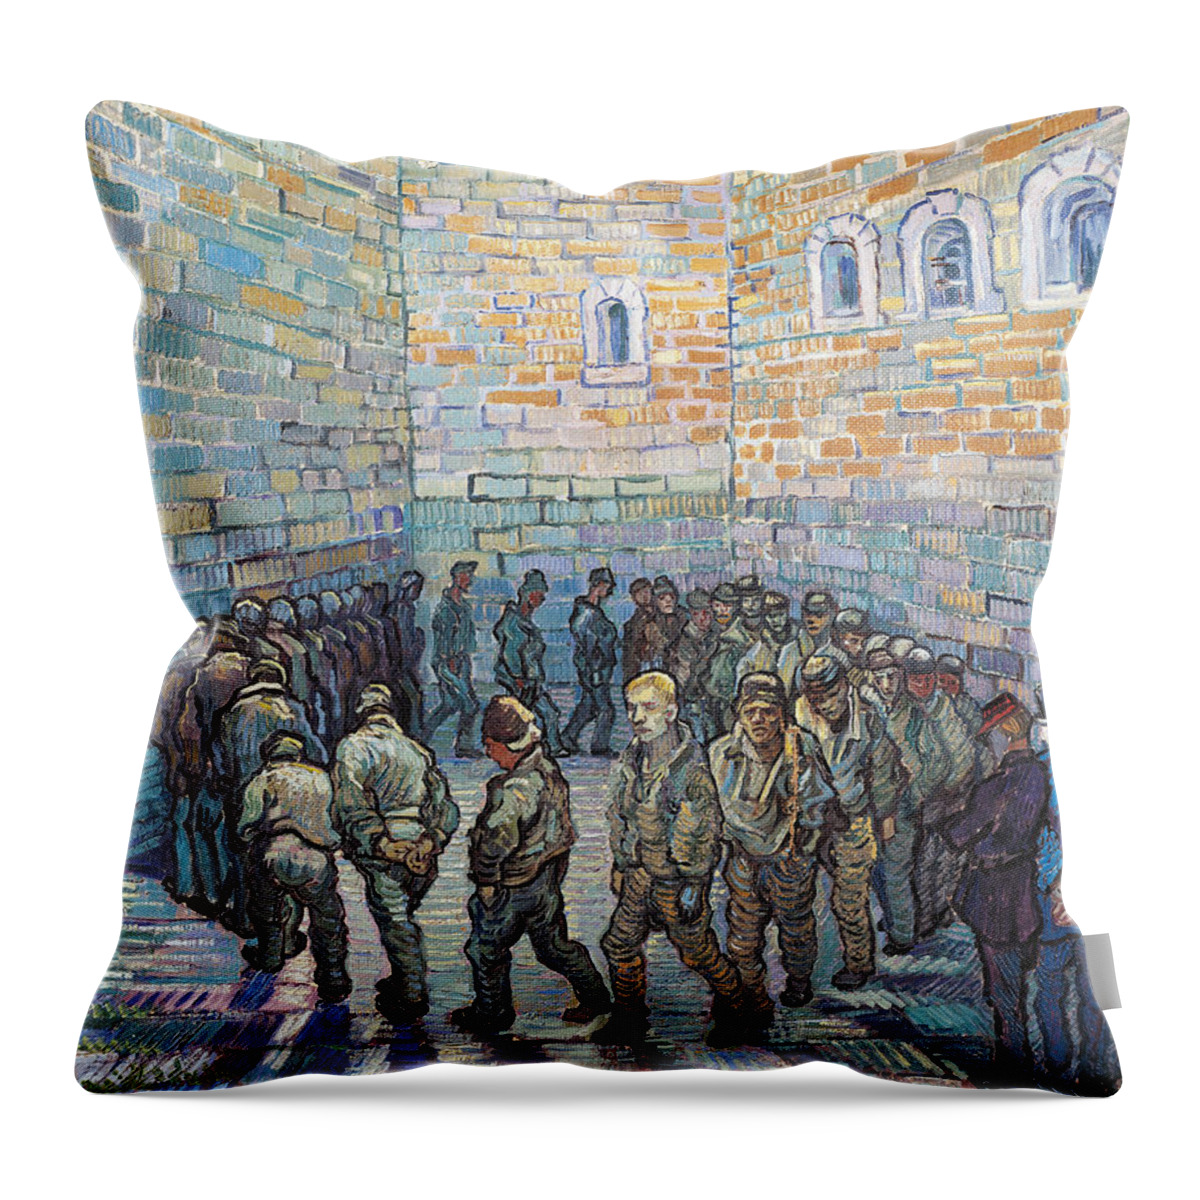 Prisoner Throw Pillow featuring the painting The Exercise Yard by Vincent Van Gogh